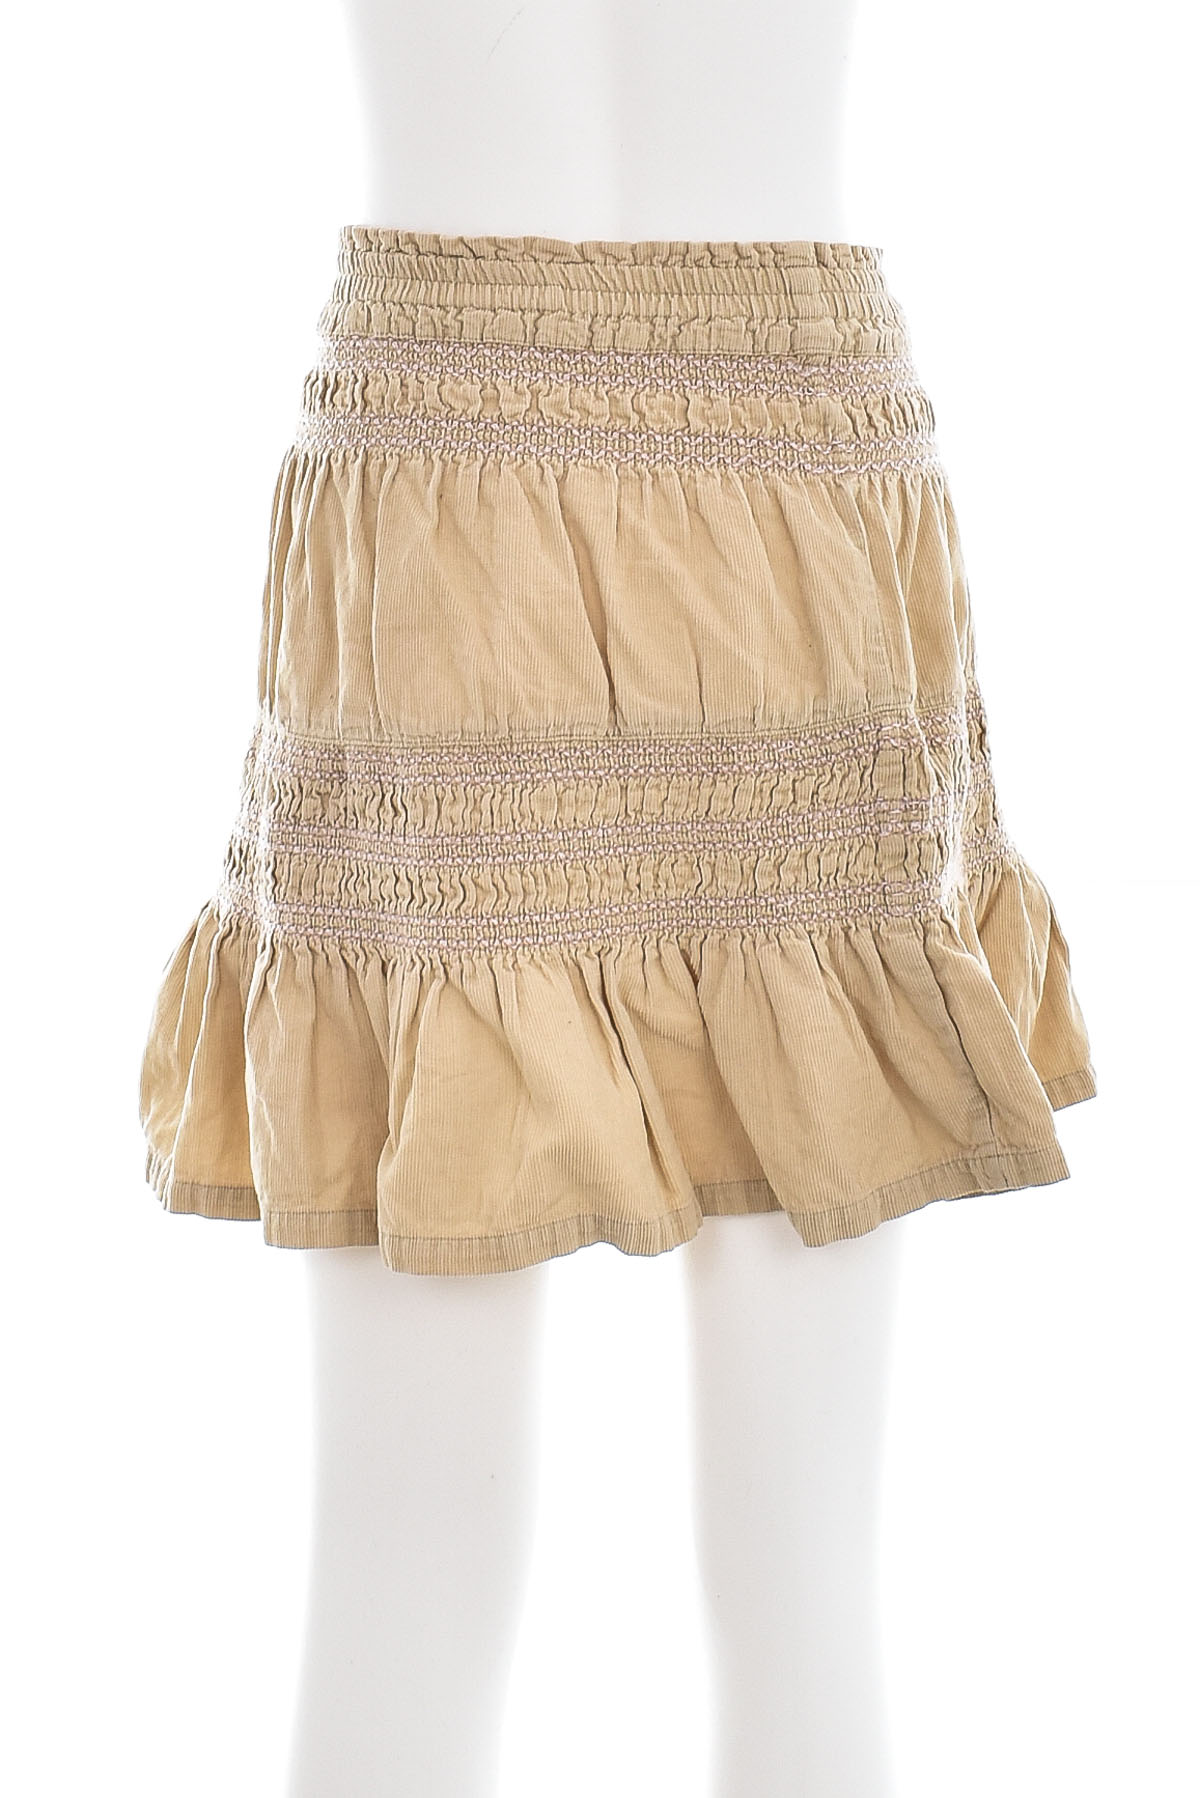 Girls' skirts - UNITED COLORS OF BENETTON - 1